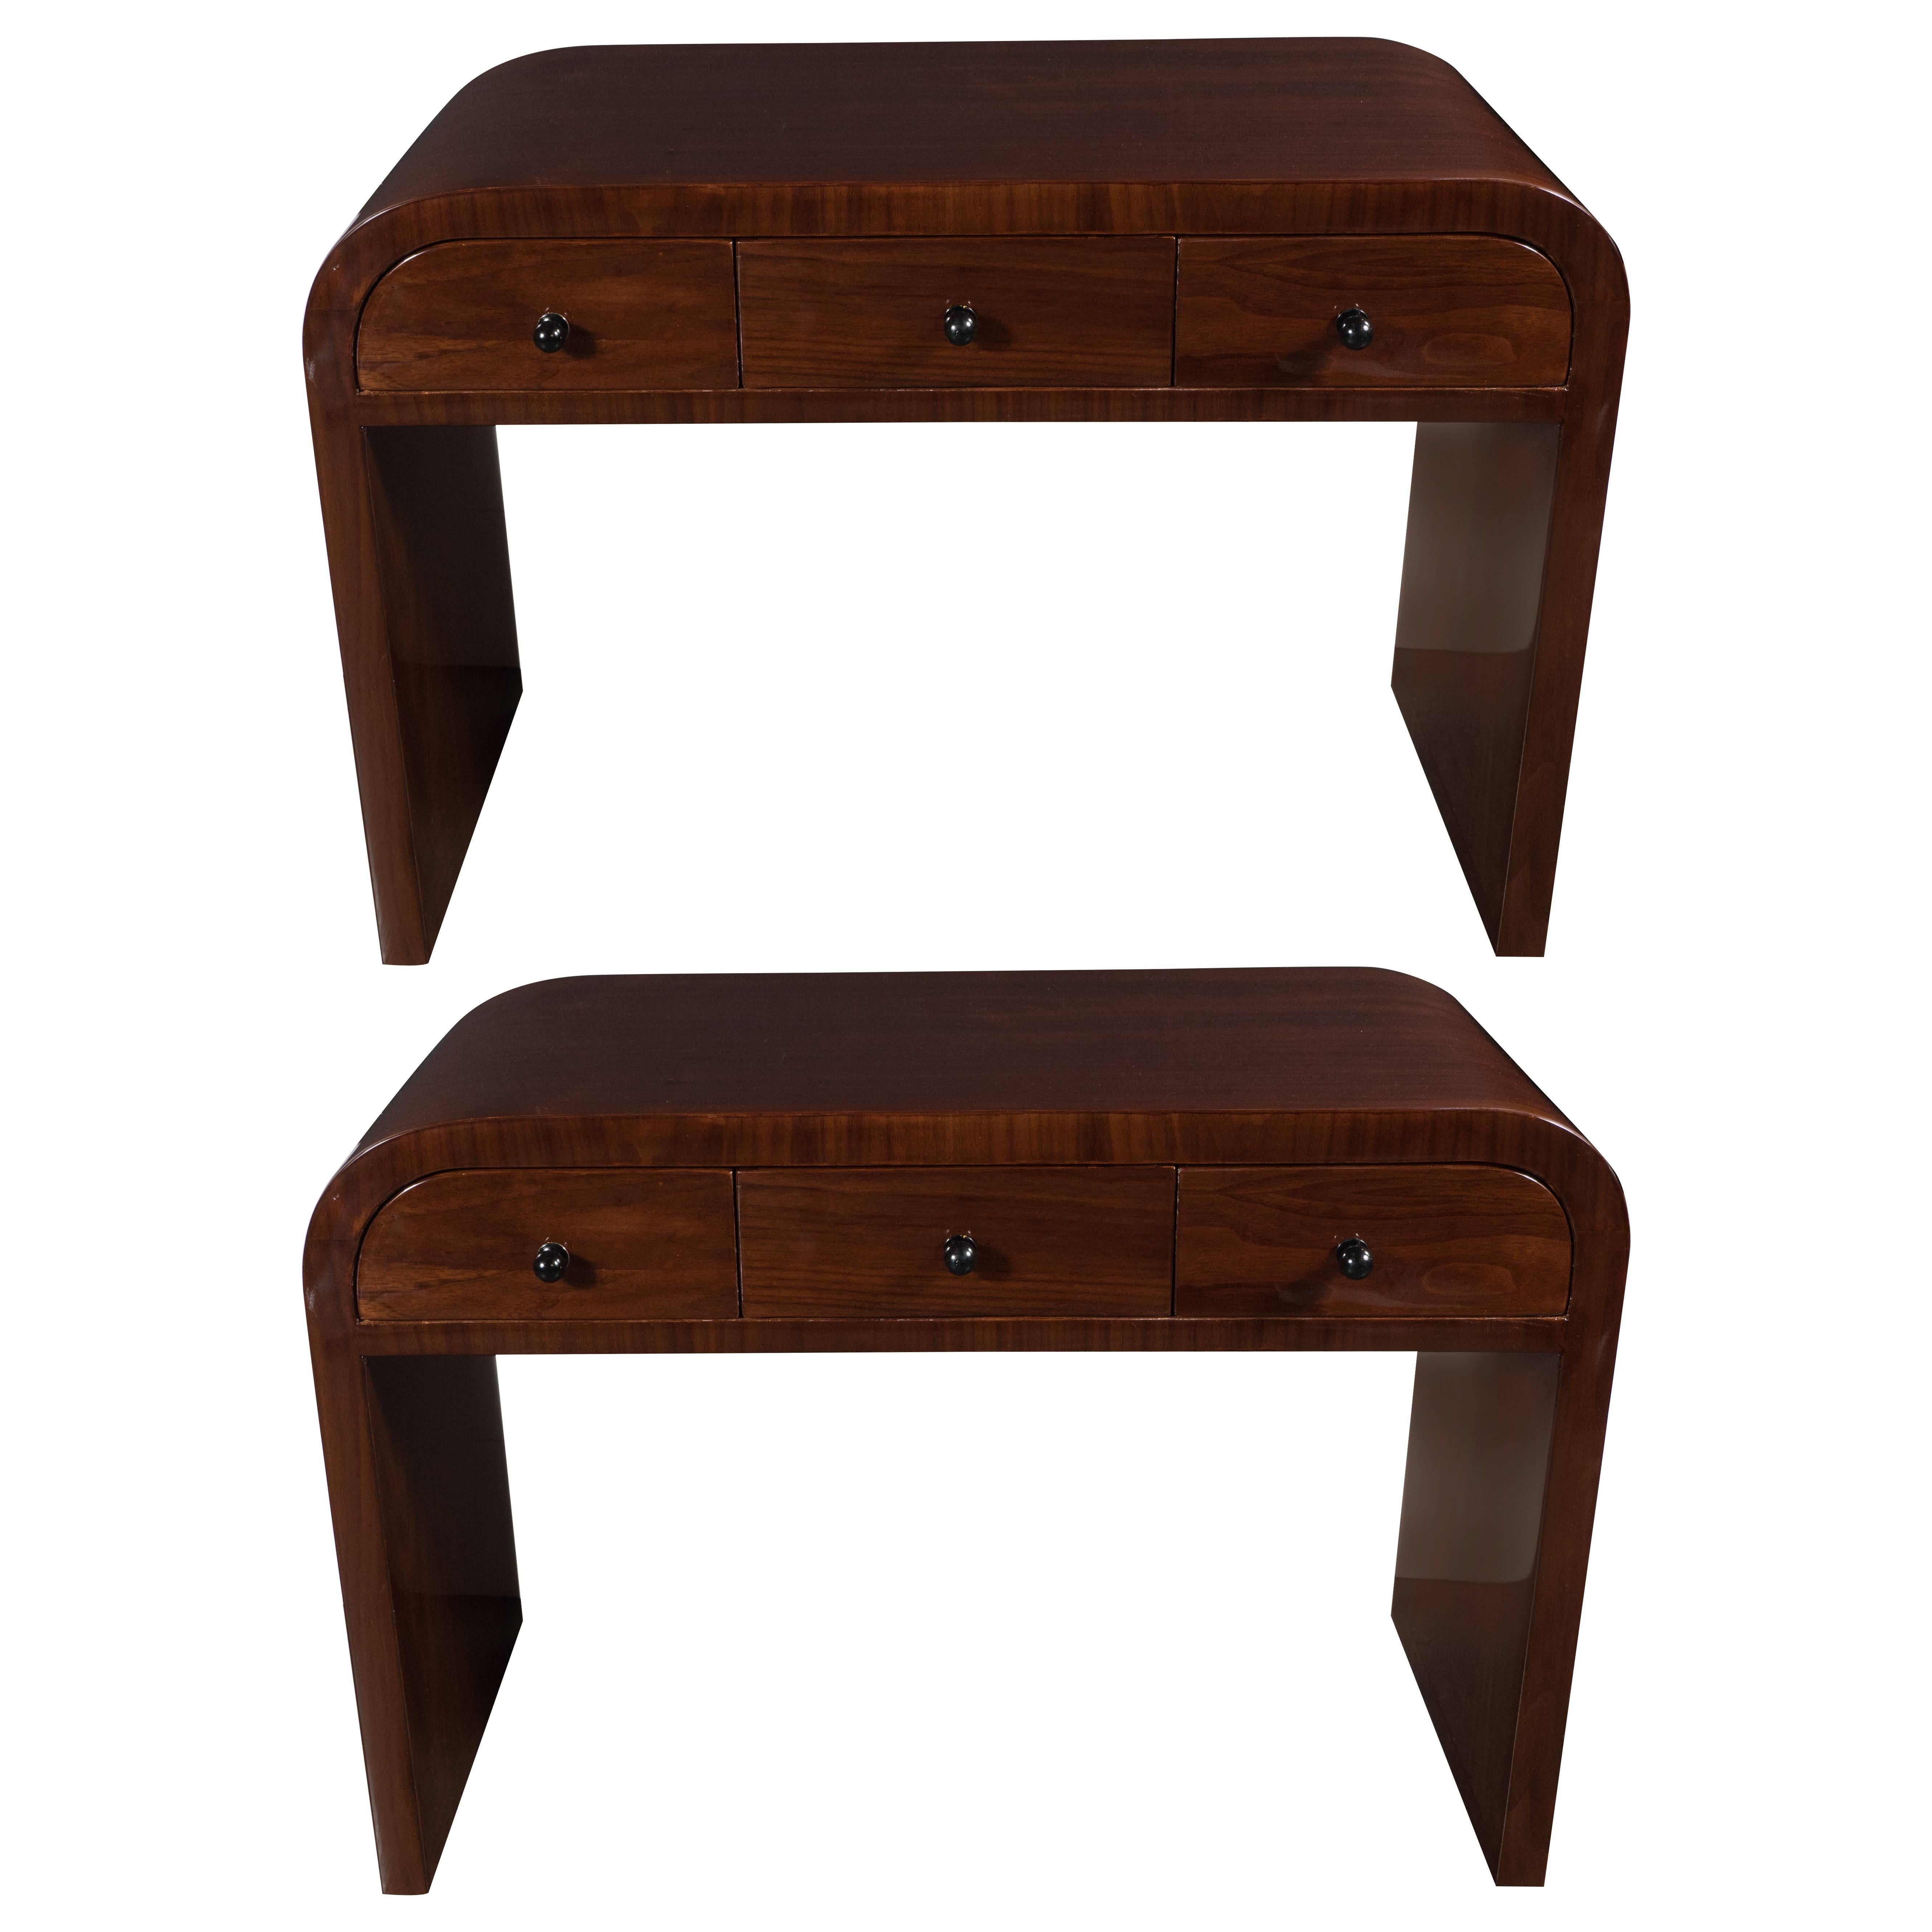 Pair of Art Deco End Tables/Nightstands in Bookmatched Walnut with Lacquer Pulls